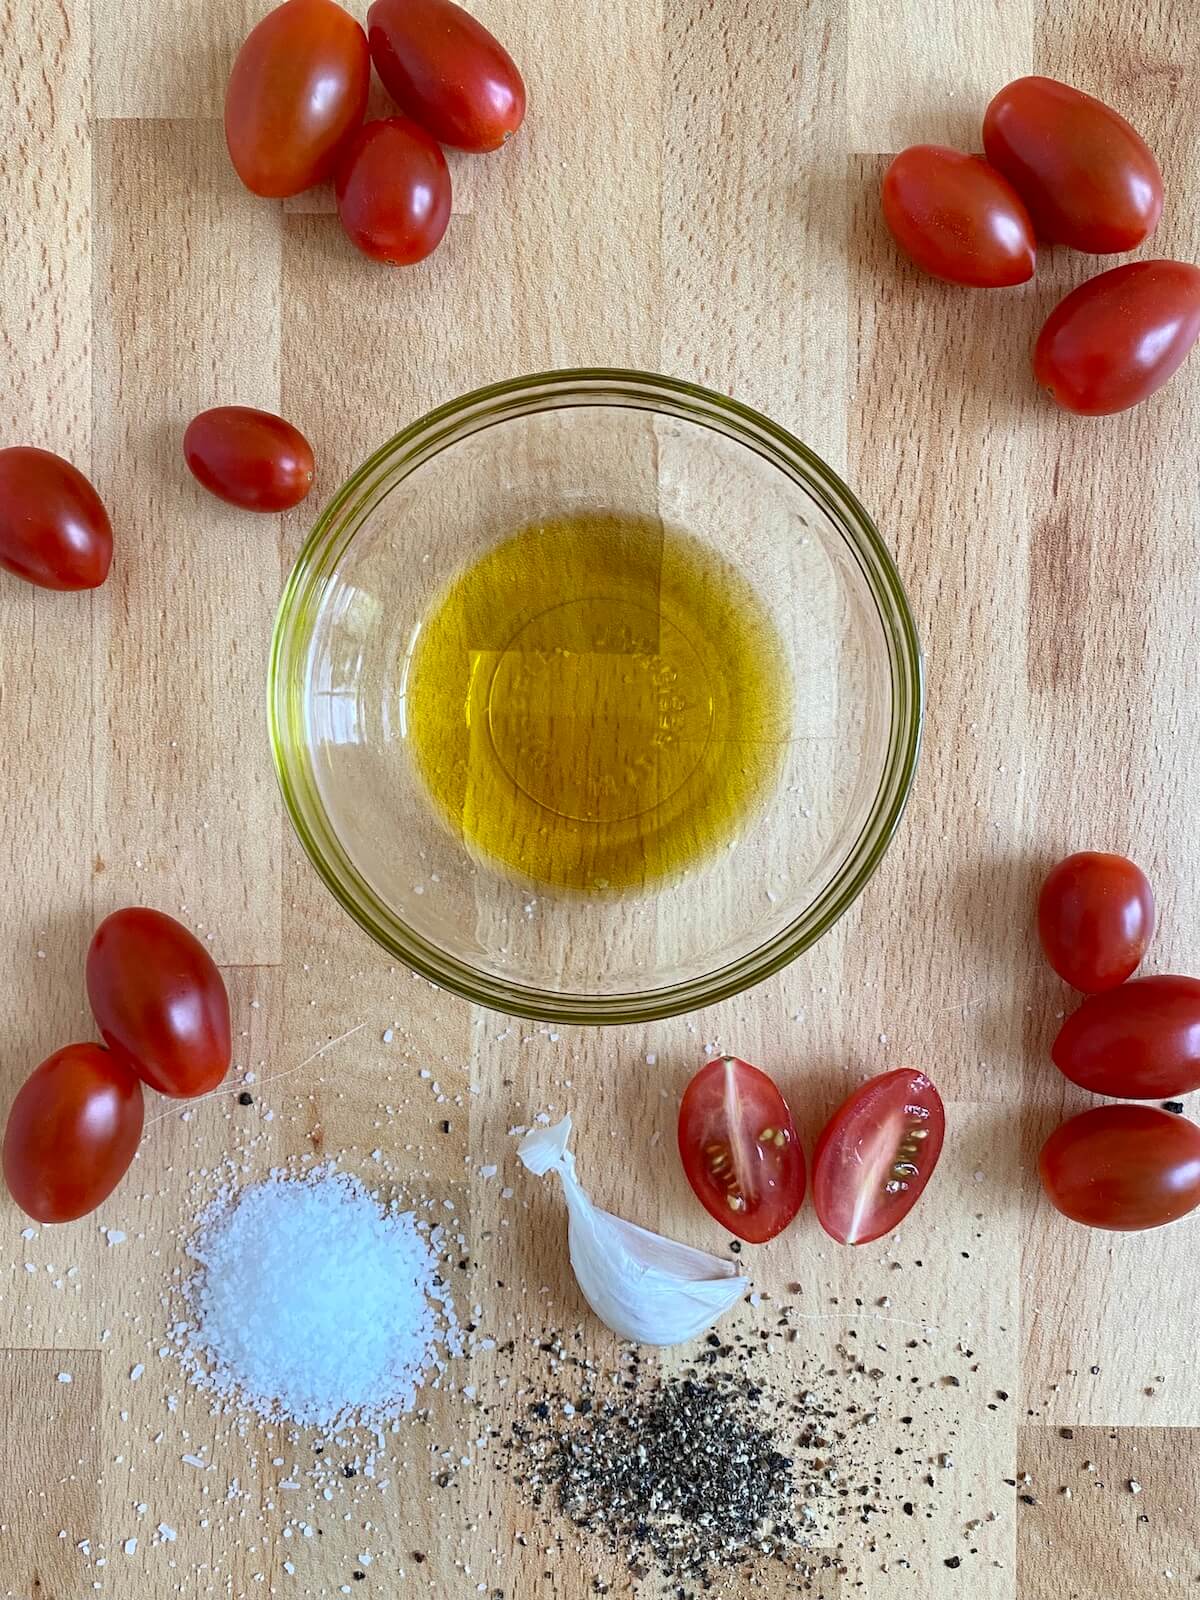 The ingredients to make air fryer cherry tomatoes are laid out on a butcher block countertop. They include cherry tomatoes, extra virgin olive oil, garlic, salt, and pepper.